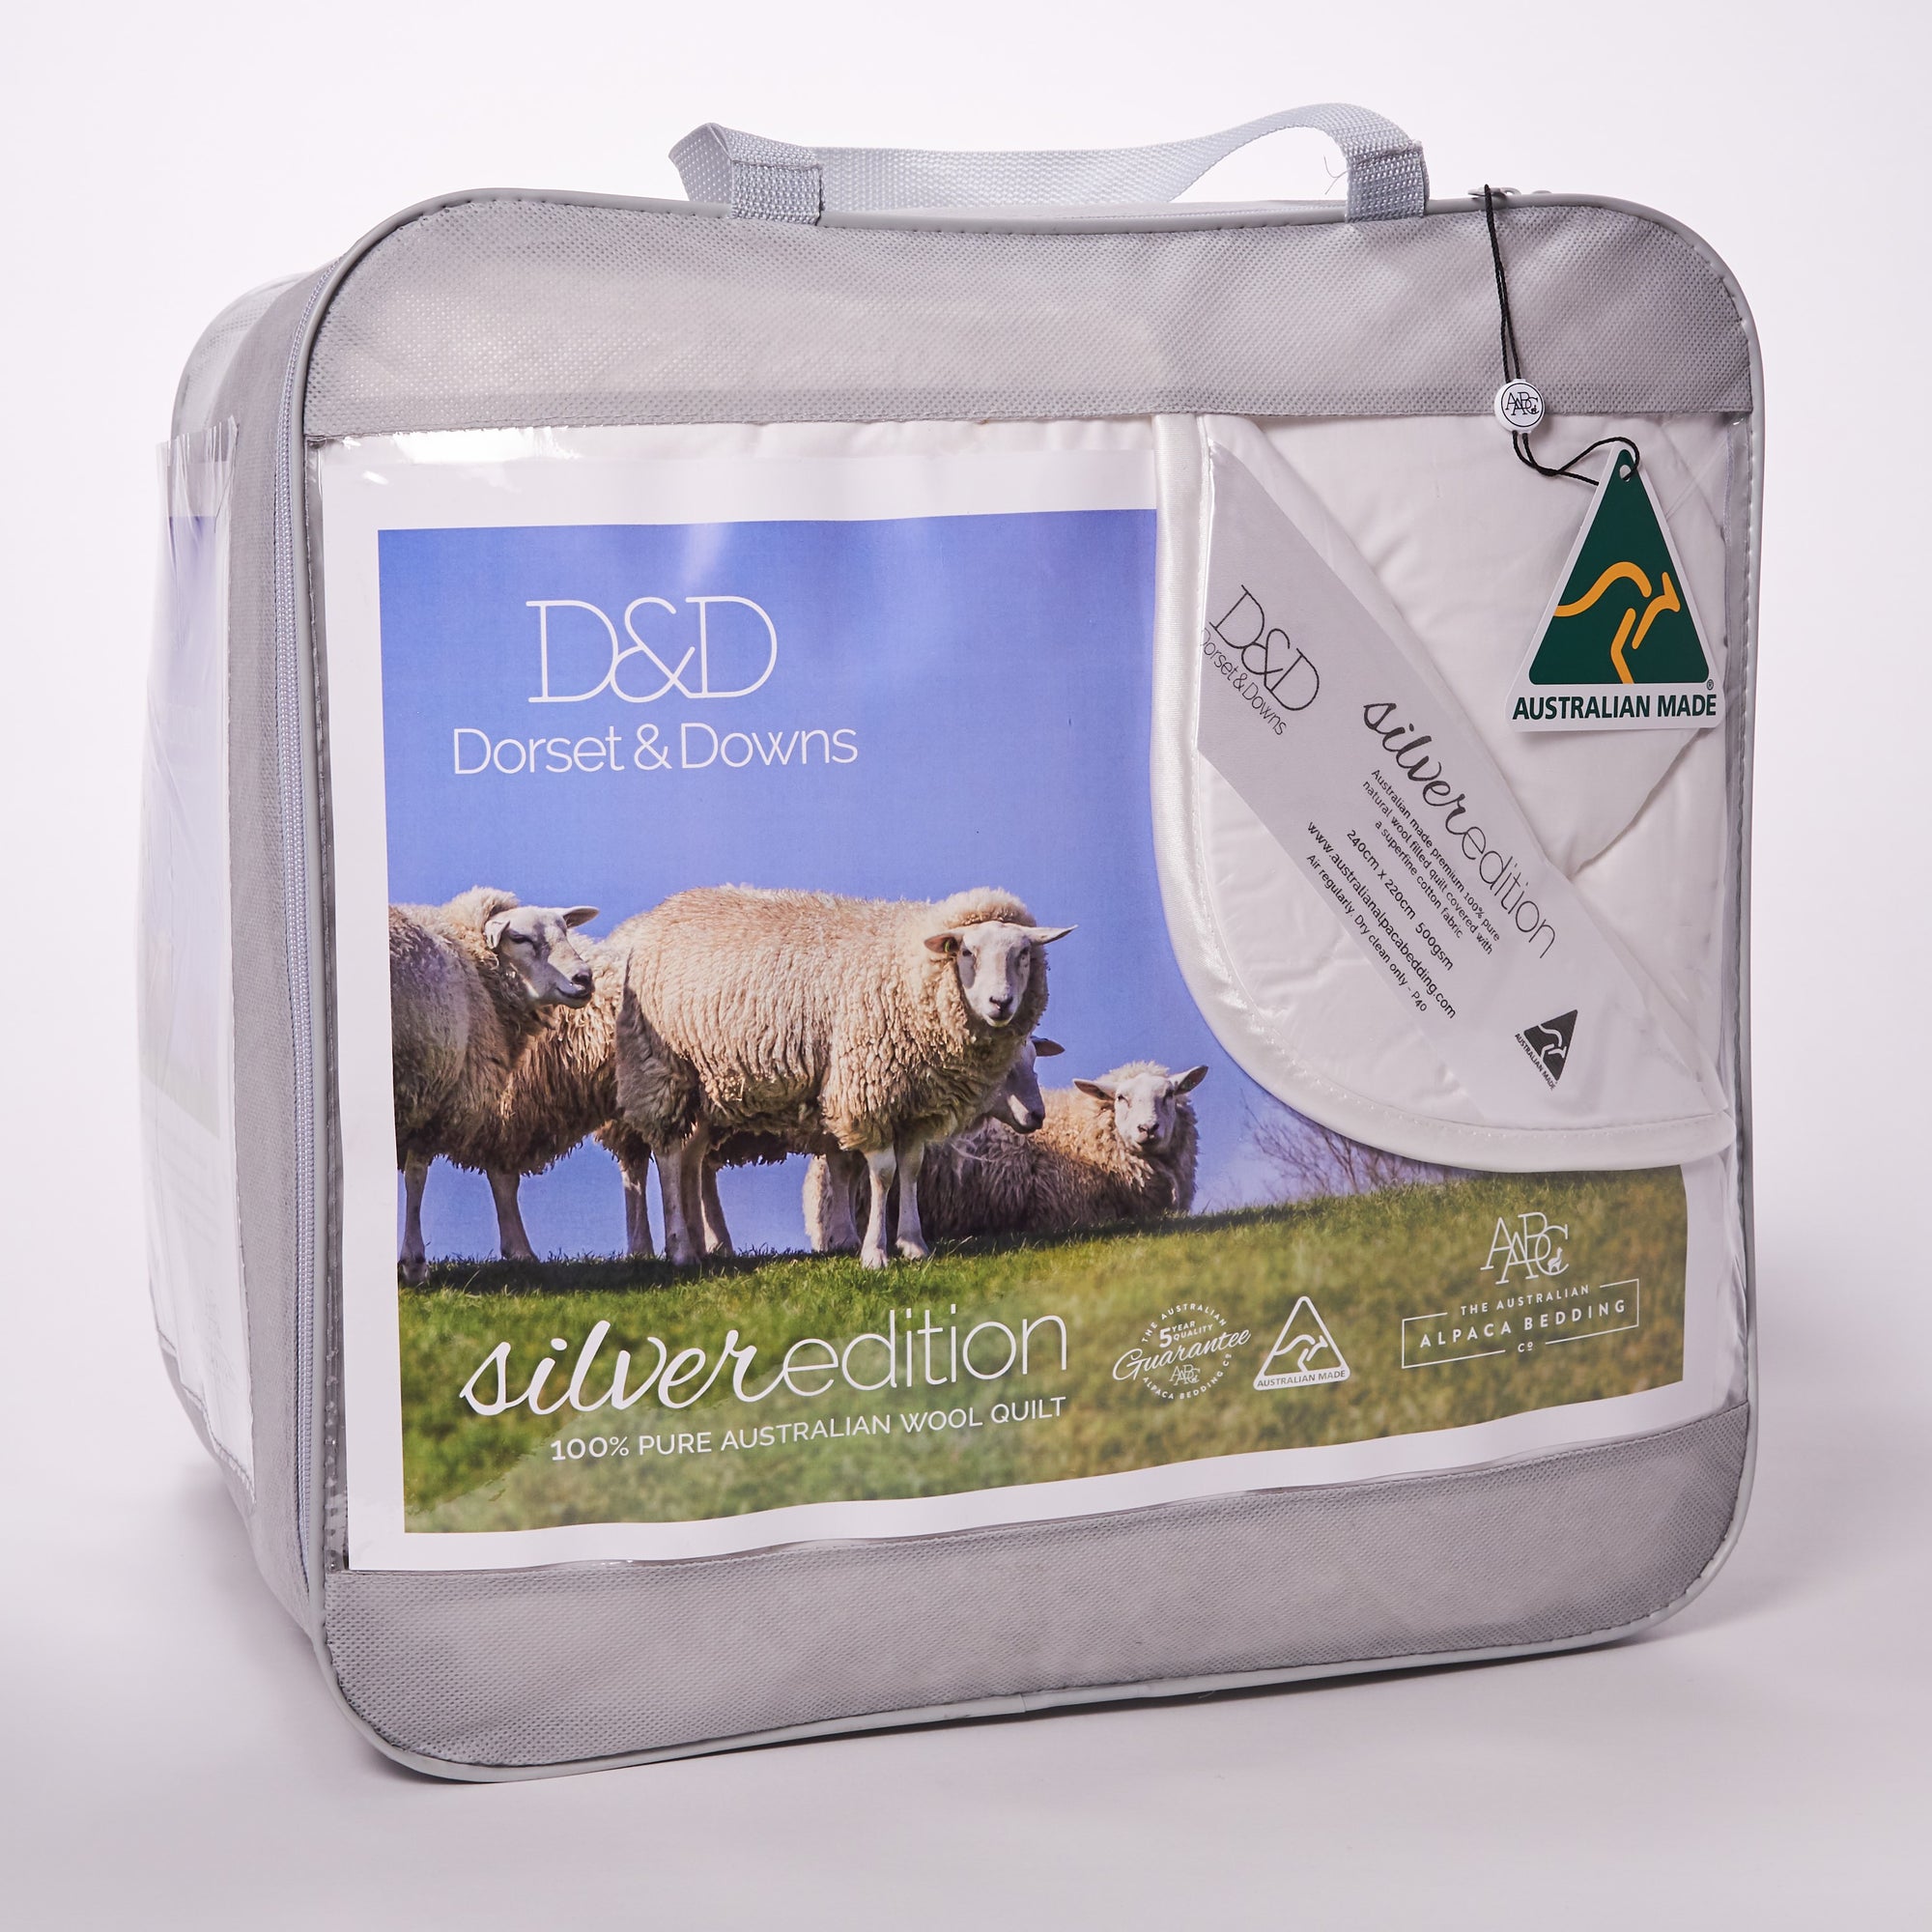 Dorset & Downs Silver Edition 300 Wool Quilt